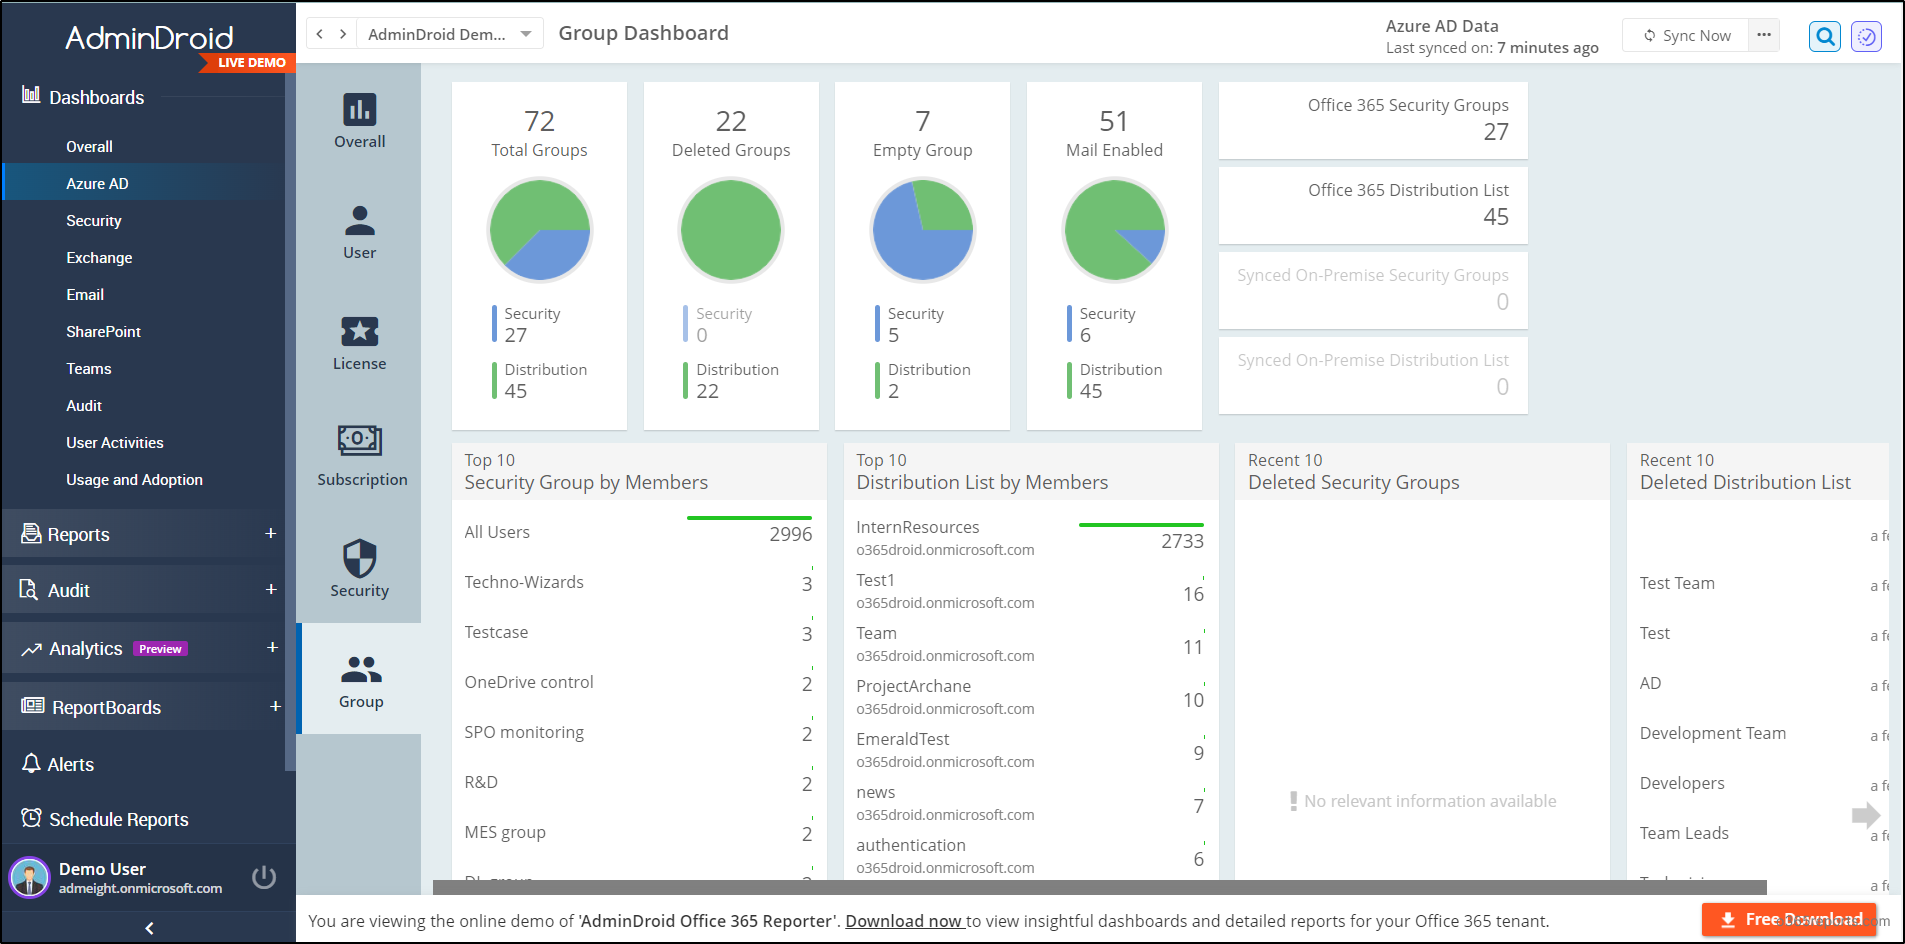 AdminDroid's Azure AD Groups Dashboard